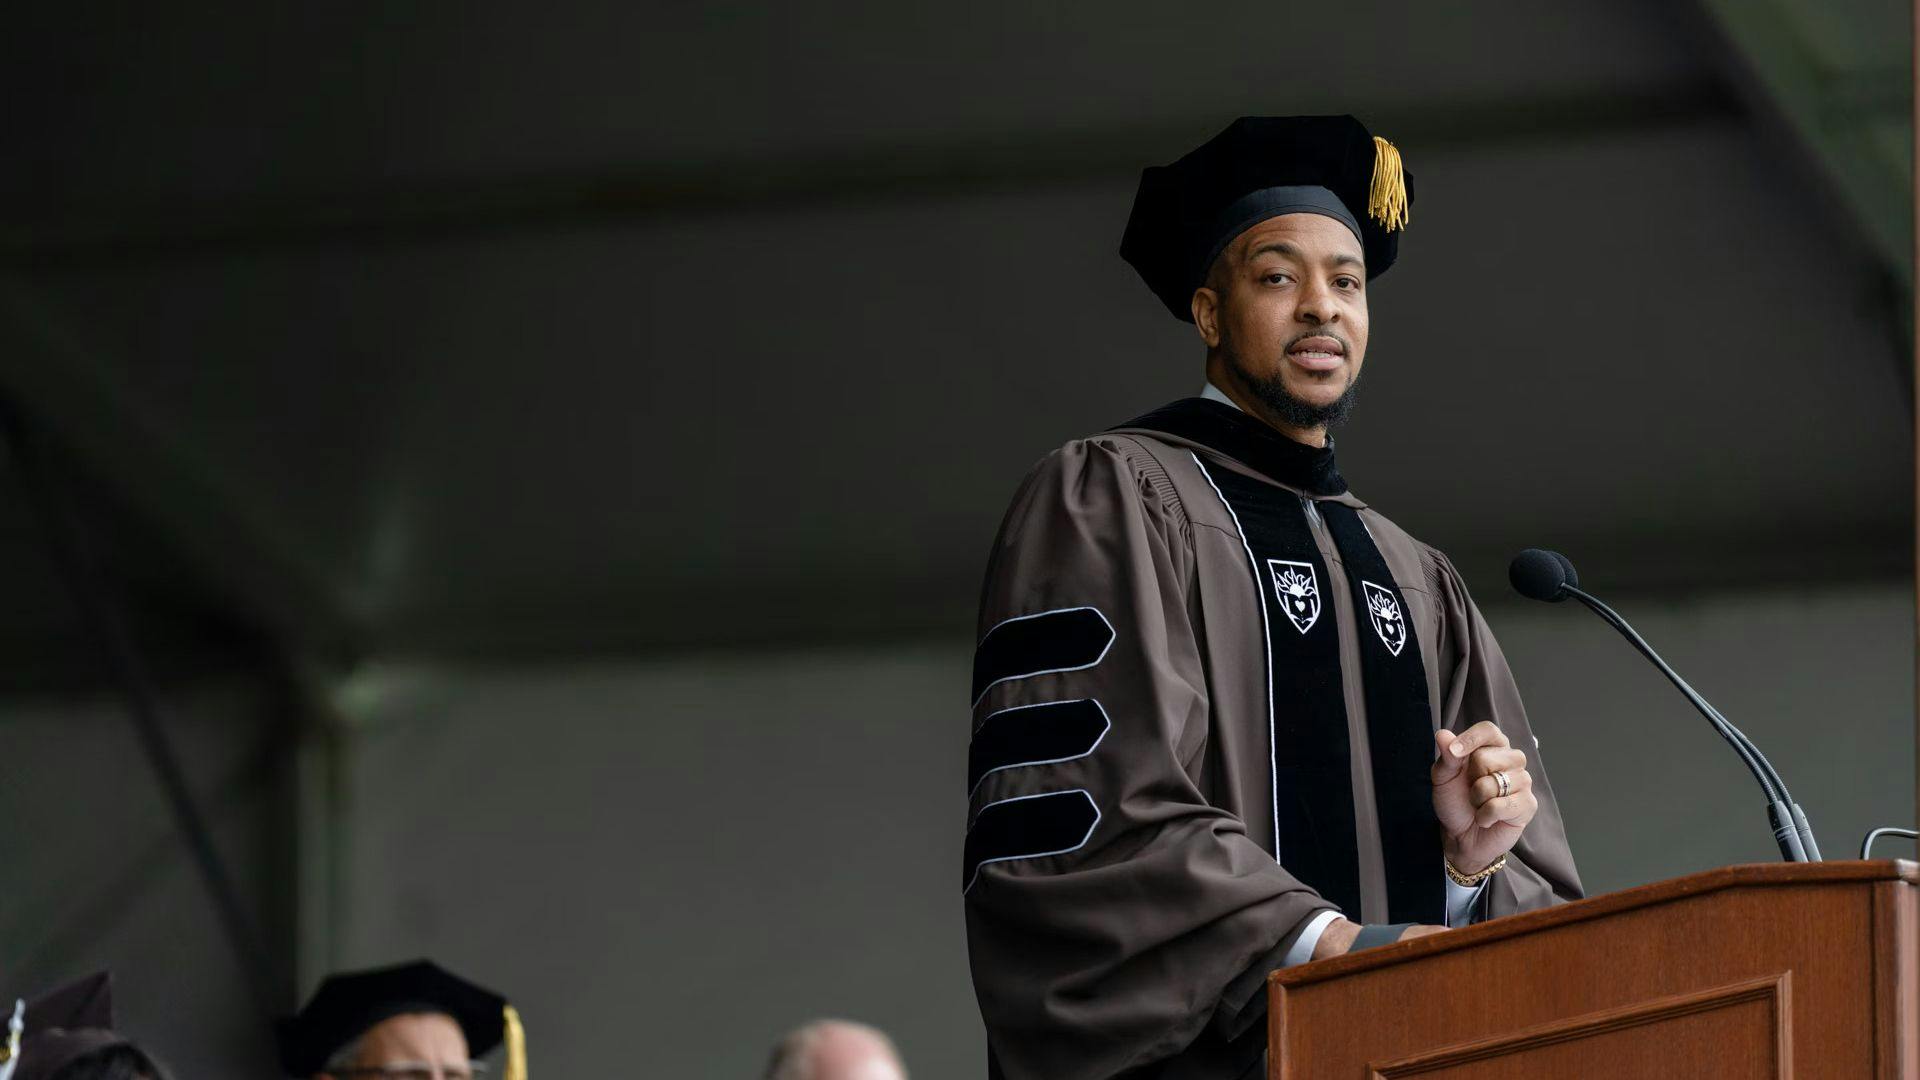 Pelicans star CJ McCollum hands out five steps to become successful in life